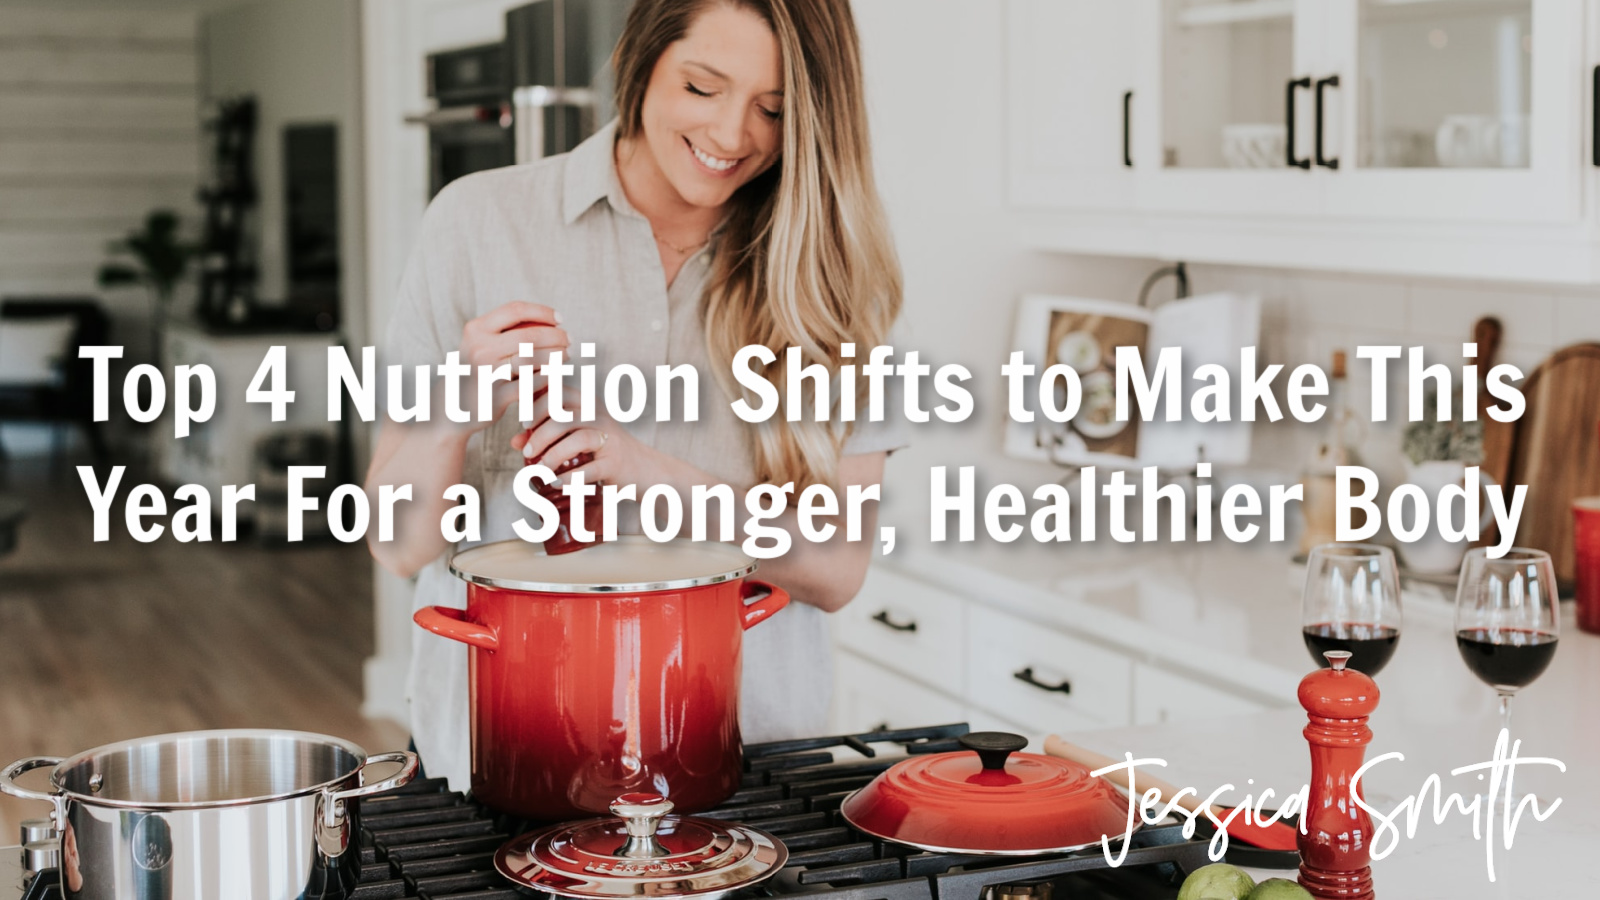 Top 4 Nutrition Shifts to Make This Year For a Stronger, Healthier Body